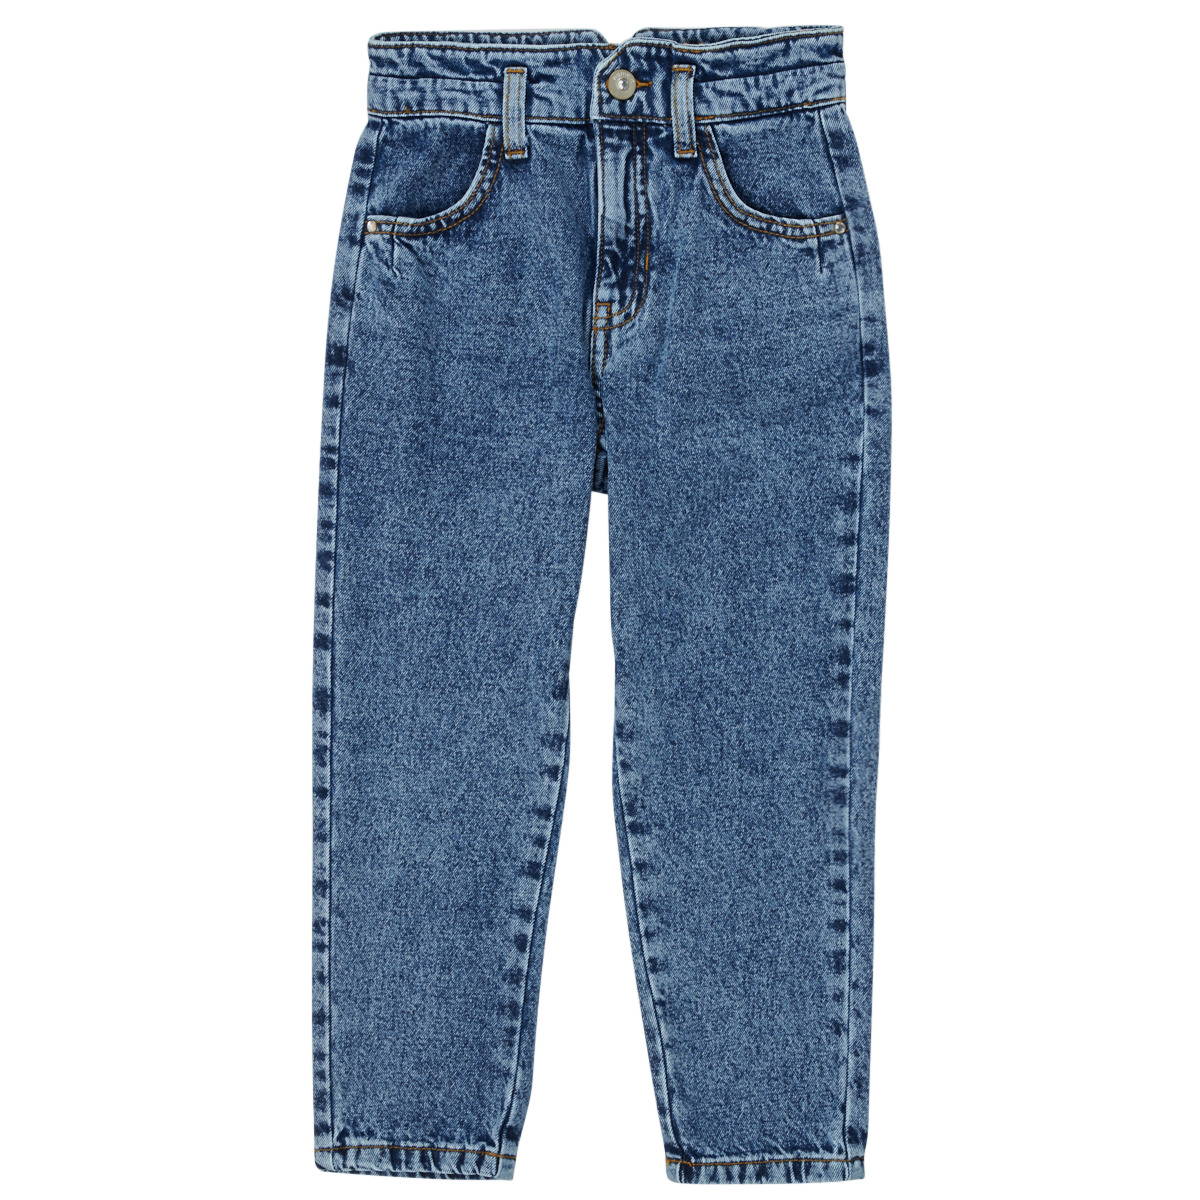 delivery jeans Europe | 36,00 NKFBELLA - € Blue Spartoo Clothing ! it - Child Fast Name straight